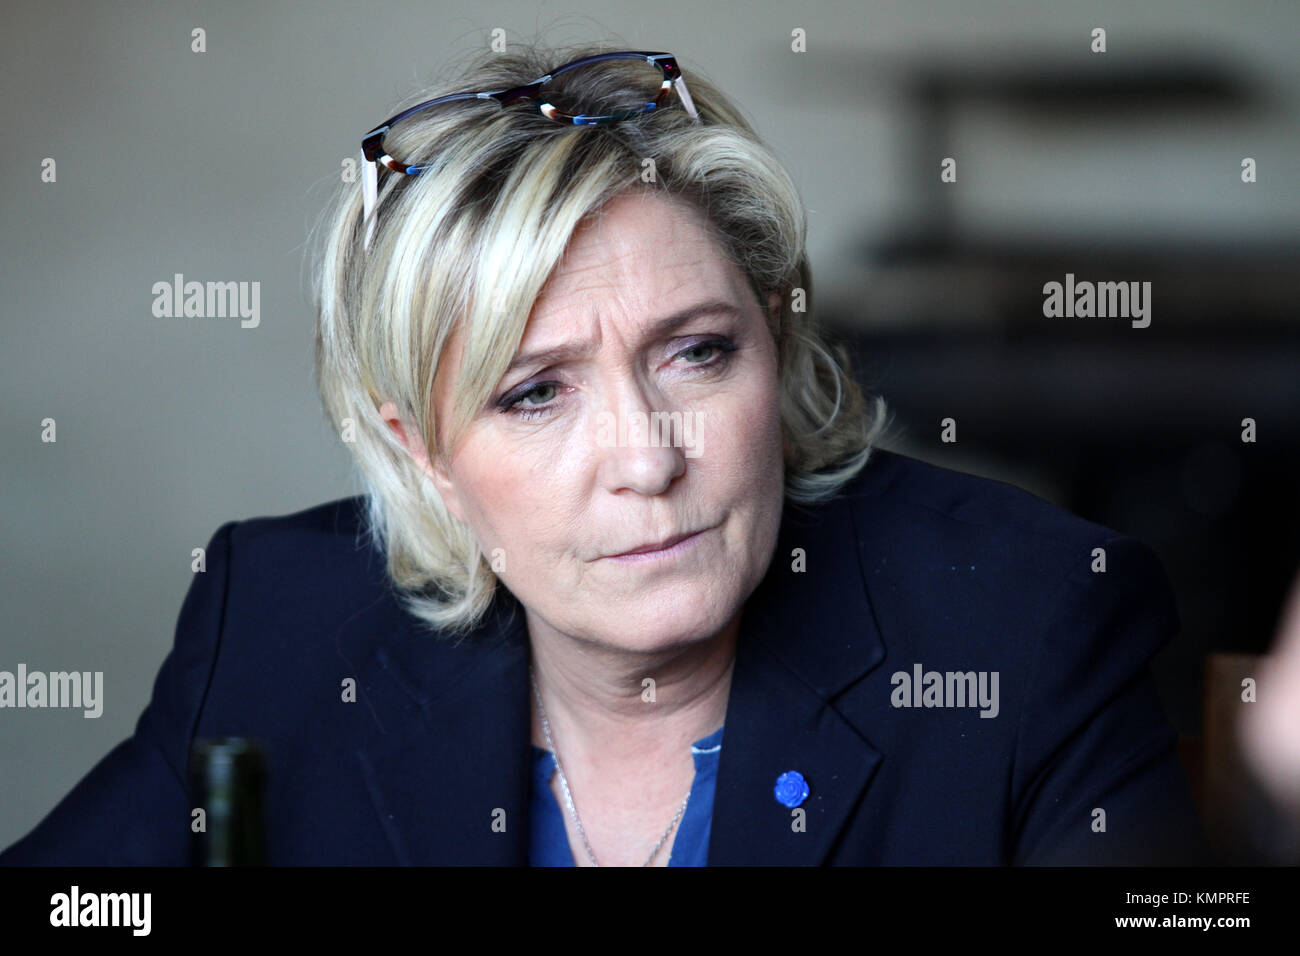 Loubersan (France) March, 09 2017 ; Marine LE PEN Candidate of the far-right Front National for french presidential election of 2017 visiting on a far Stock Photo